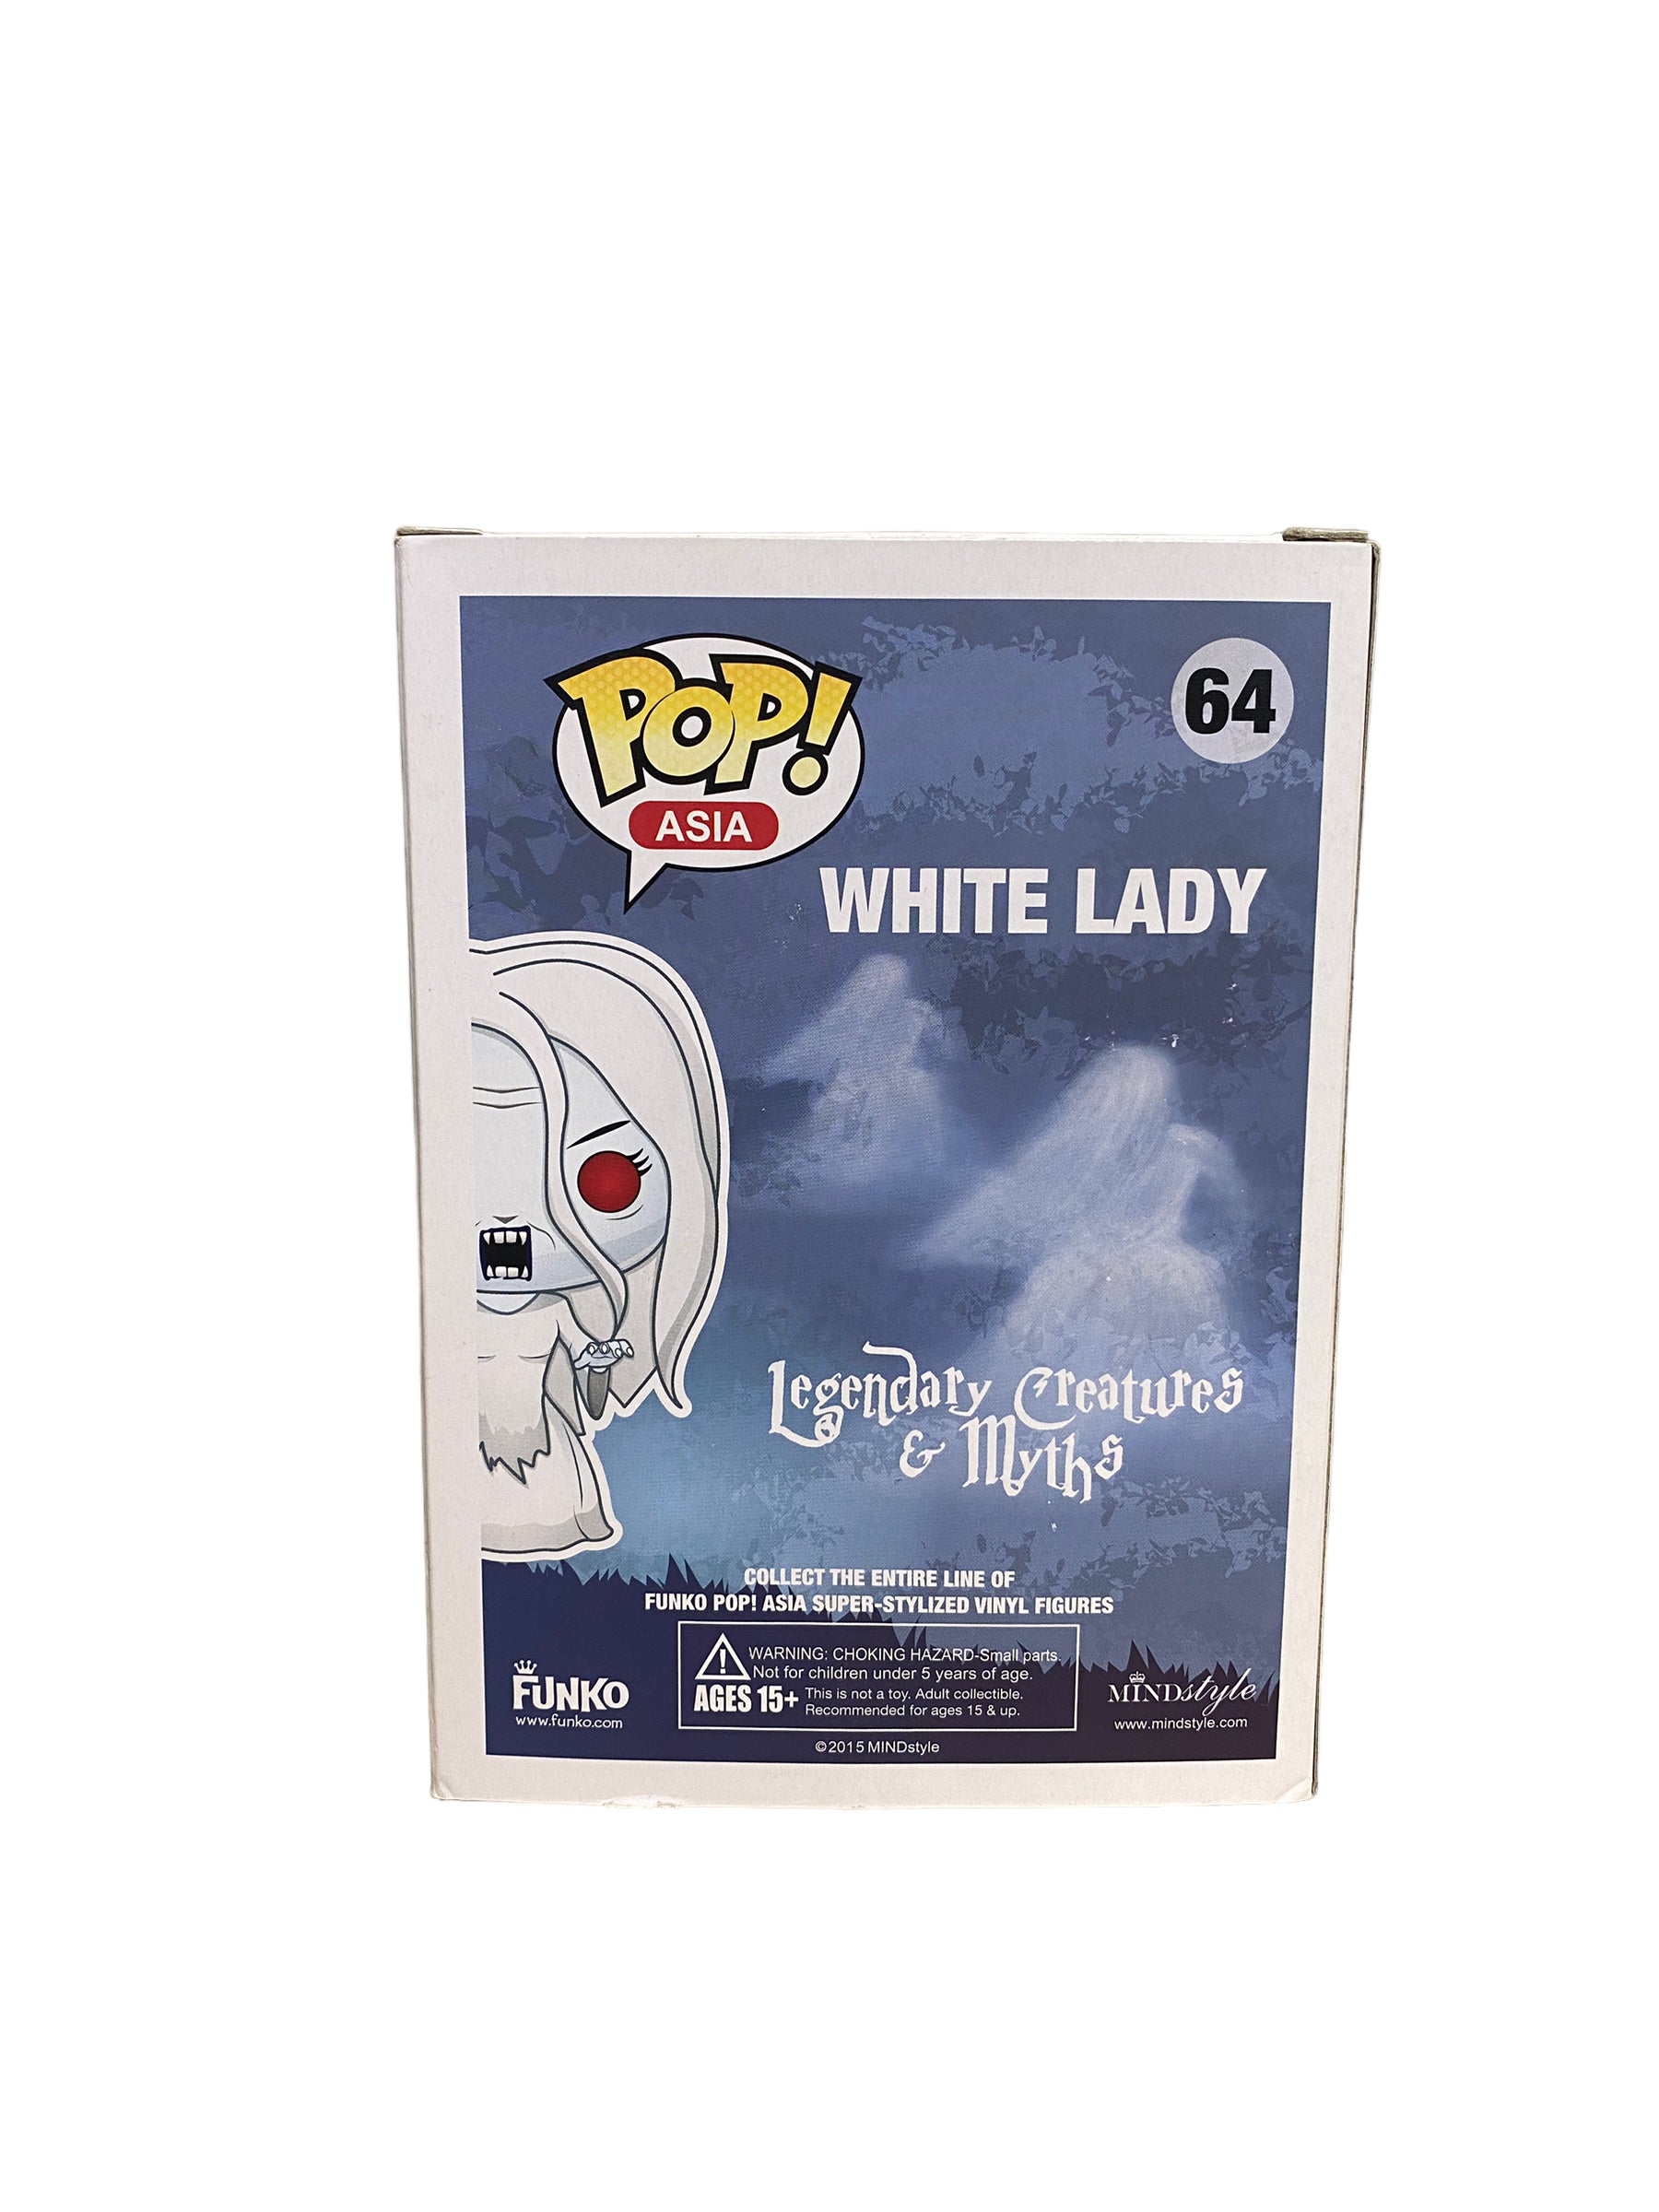 White Lady #64 (Glows in the Dark) Funko Pop! - Legendary Creatures & Myths - 2016 Asia Exclusive - Condition 7/10